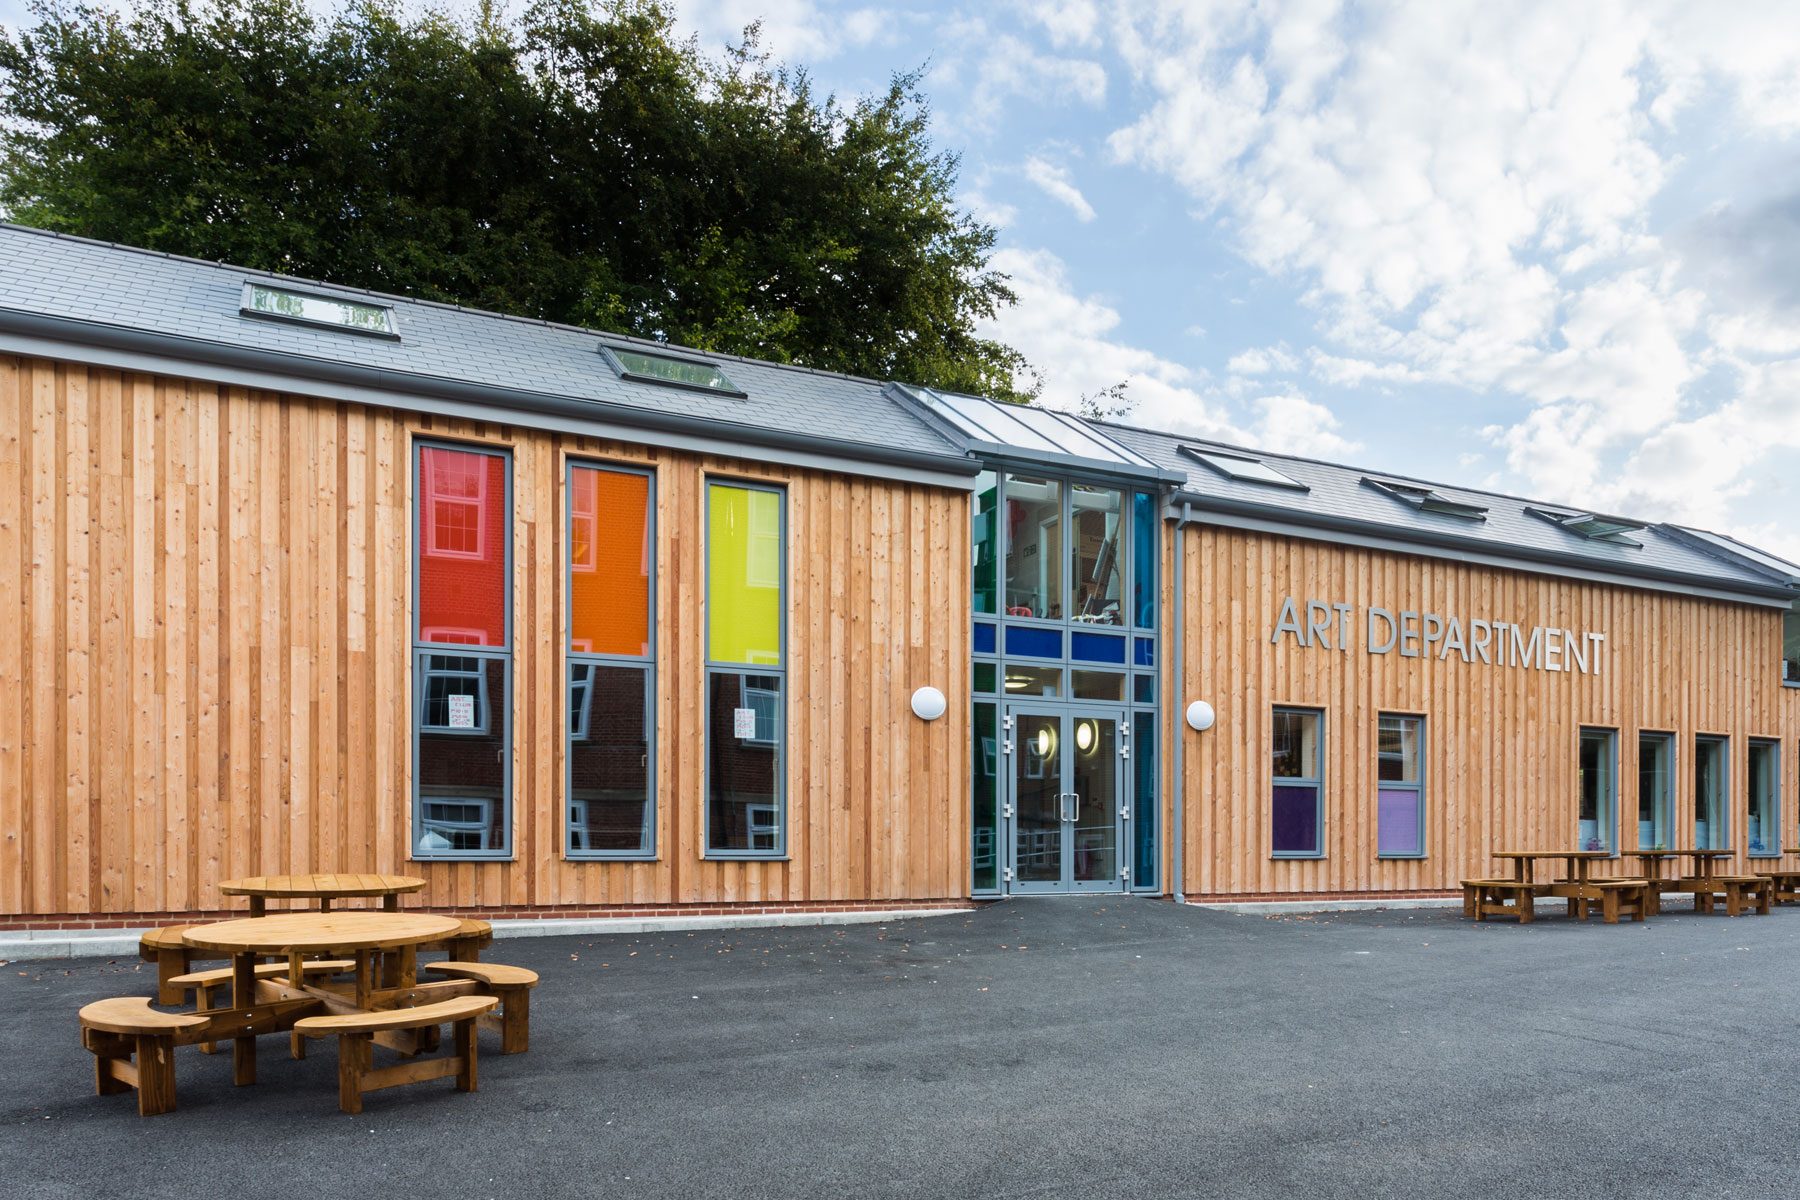 Guildford County School- New Art Block with vertical timber cladding and low pitched slate roof